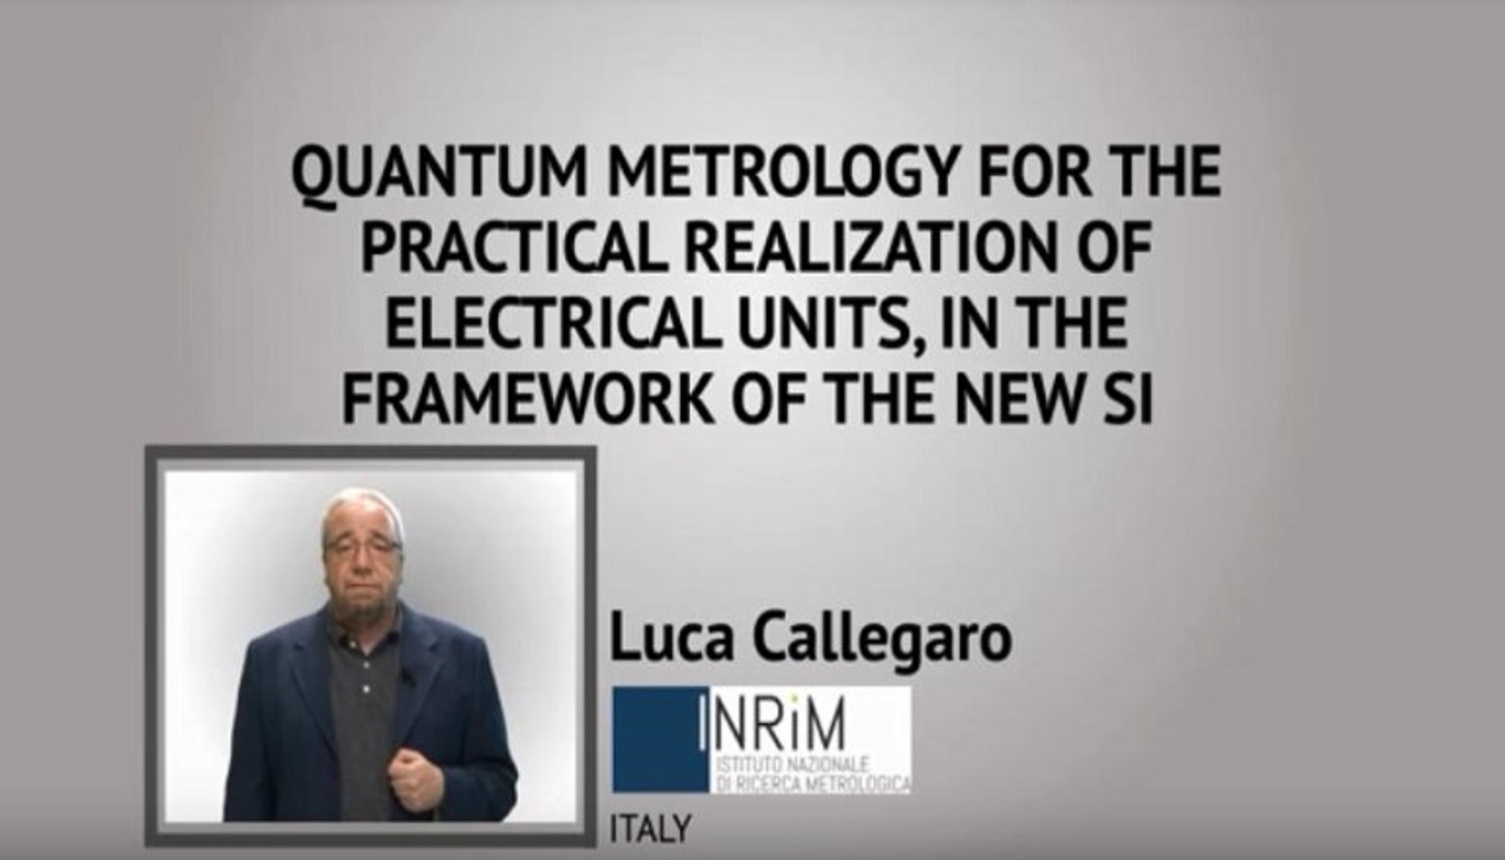 Quantum Metrology for the Practical Realization of Electrical Units